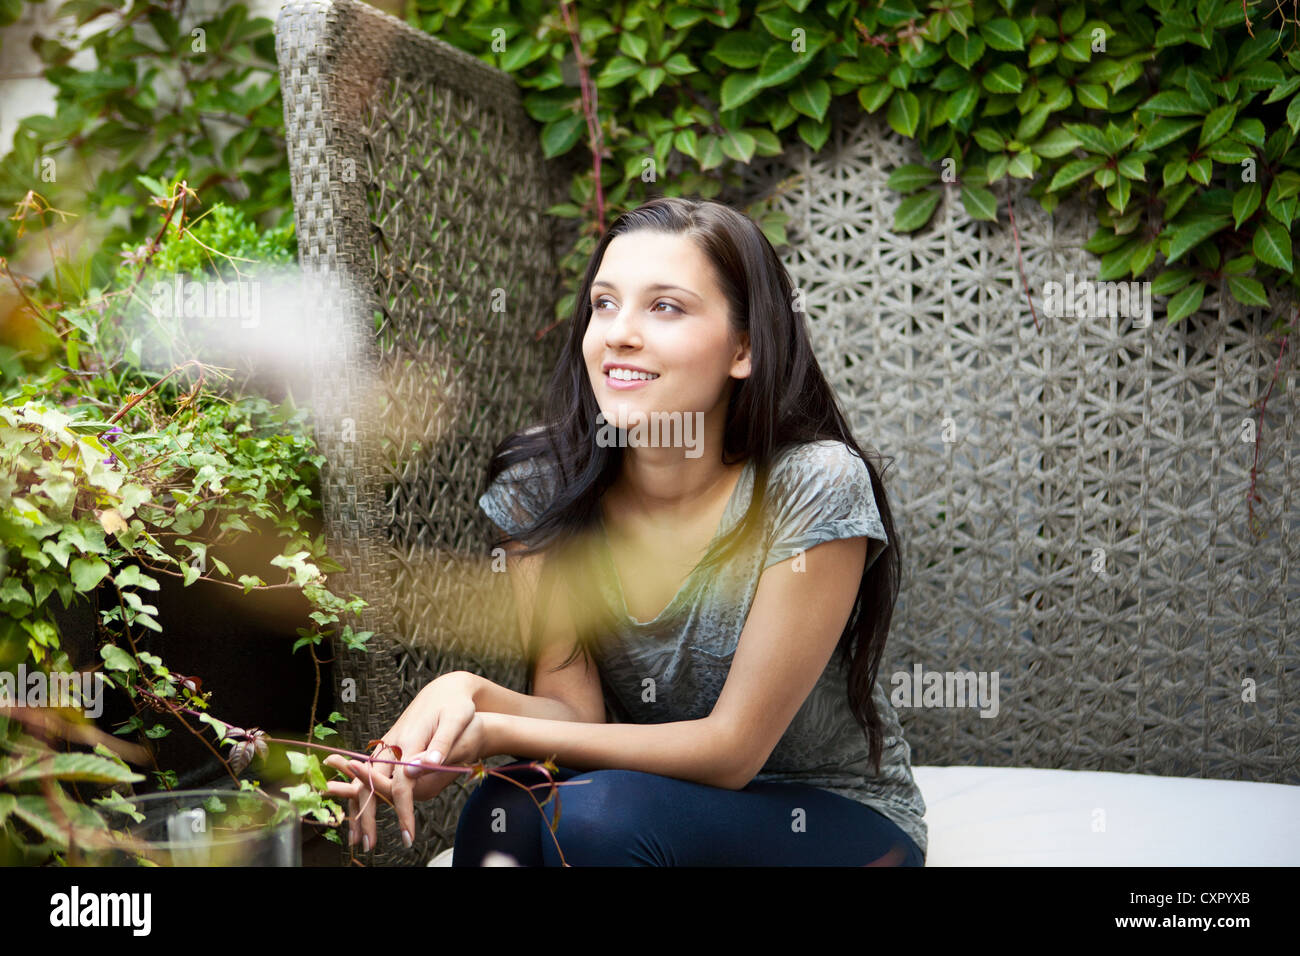 Young woman sitting on bench in garden Banque D'Images